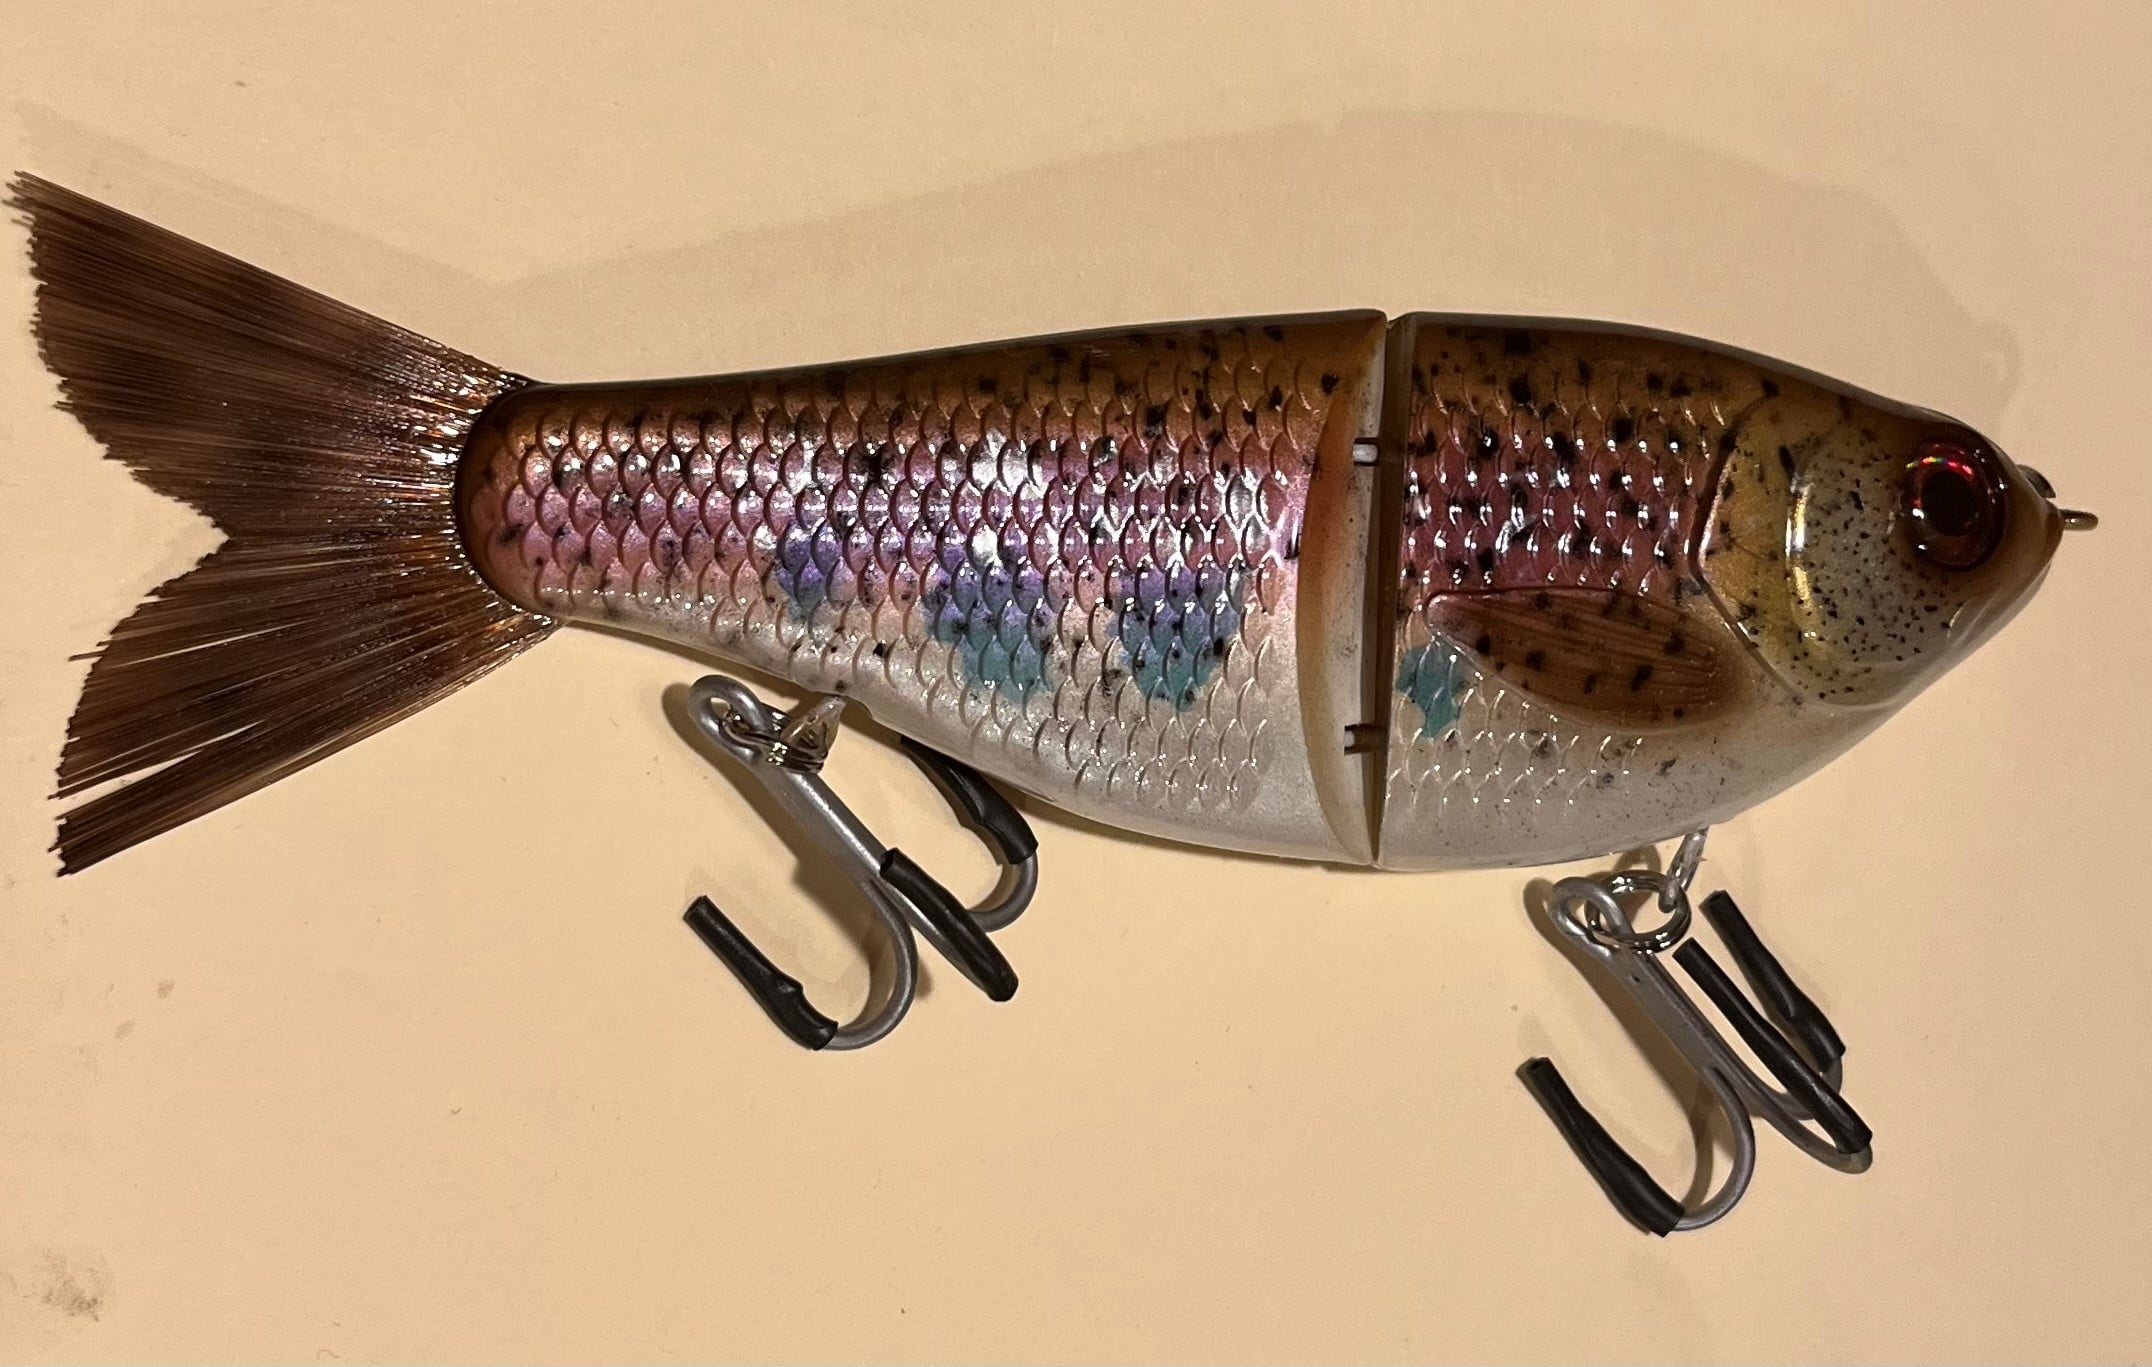 Are Custom Painted Fishing Lures Worth It? 